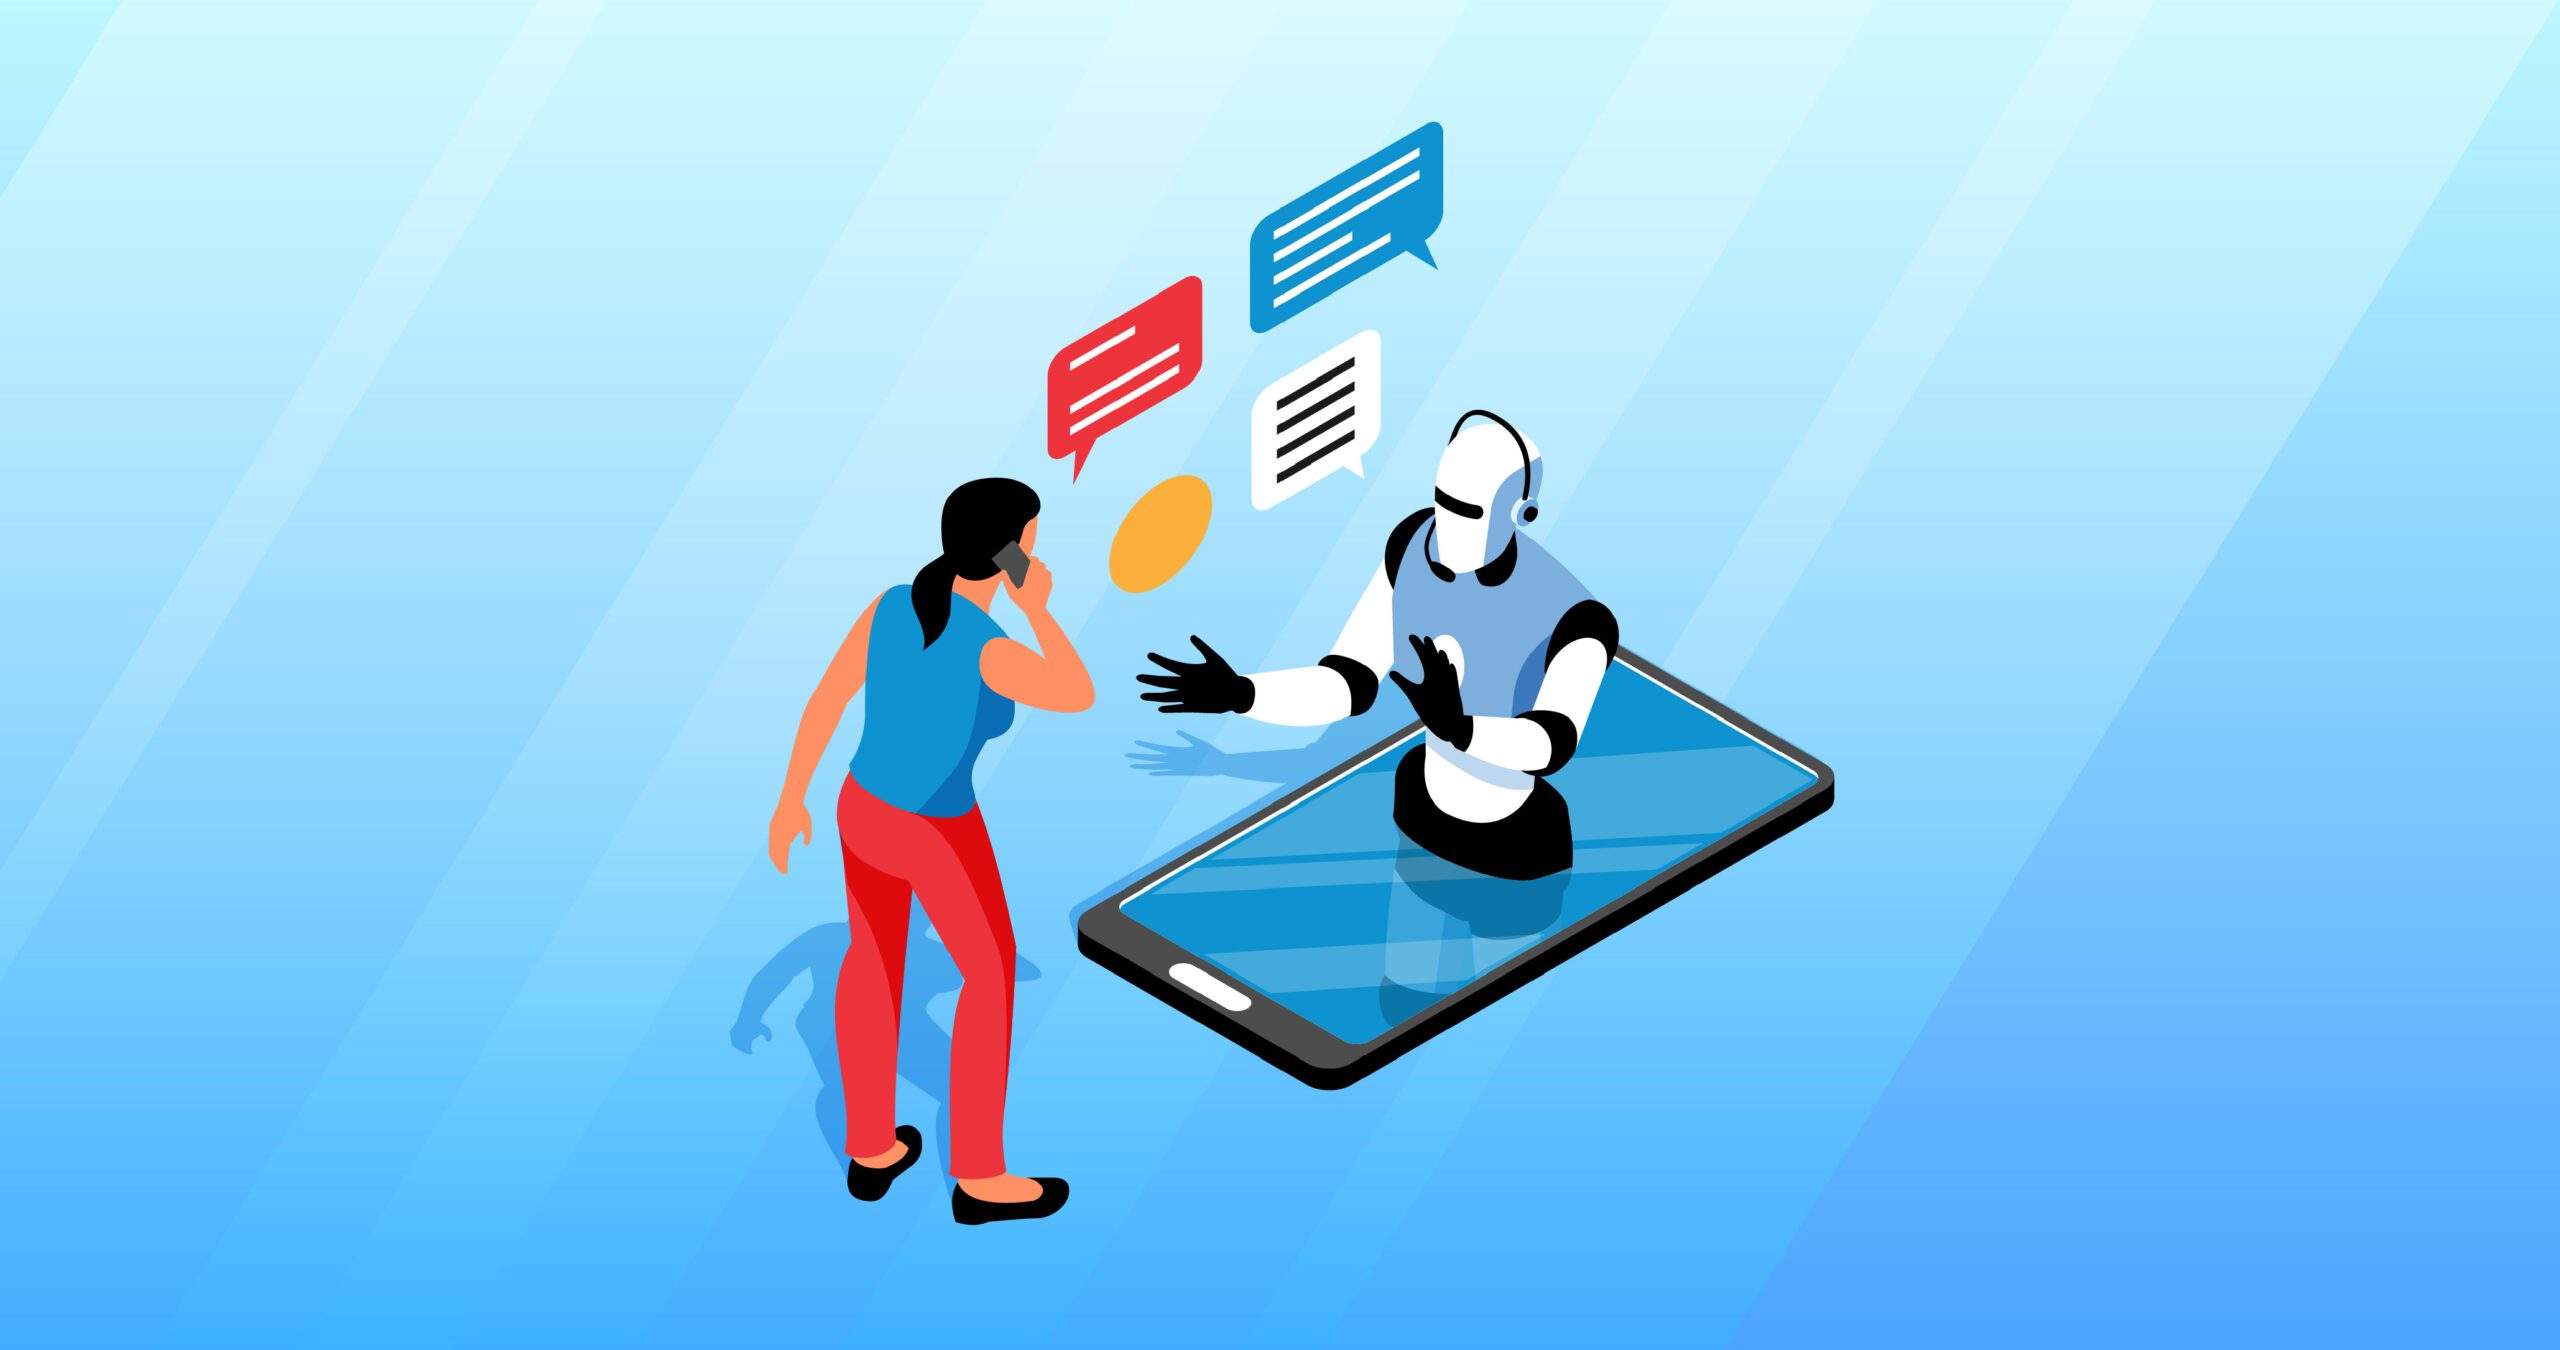 Revamp Call Center Efficiently with an AI-based Contact Center Solution